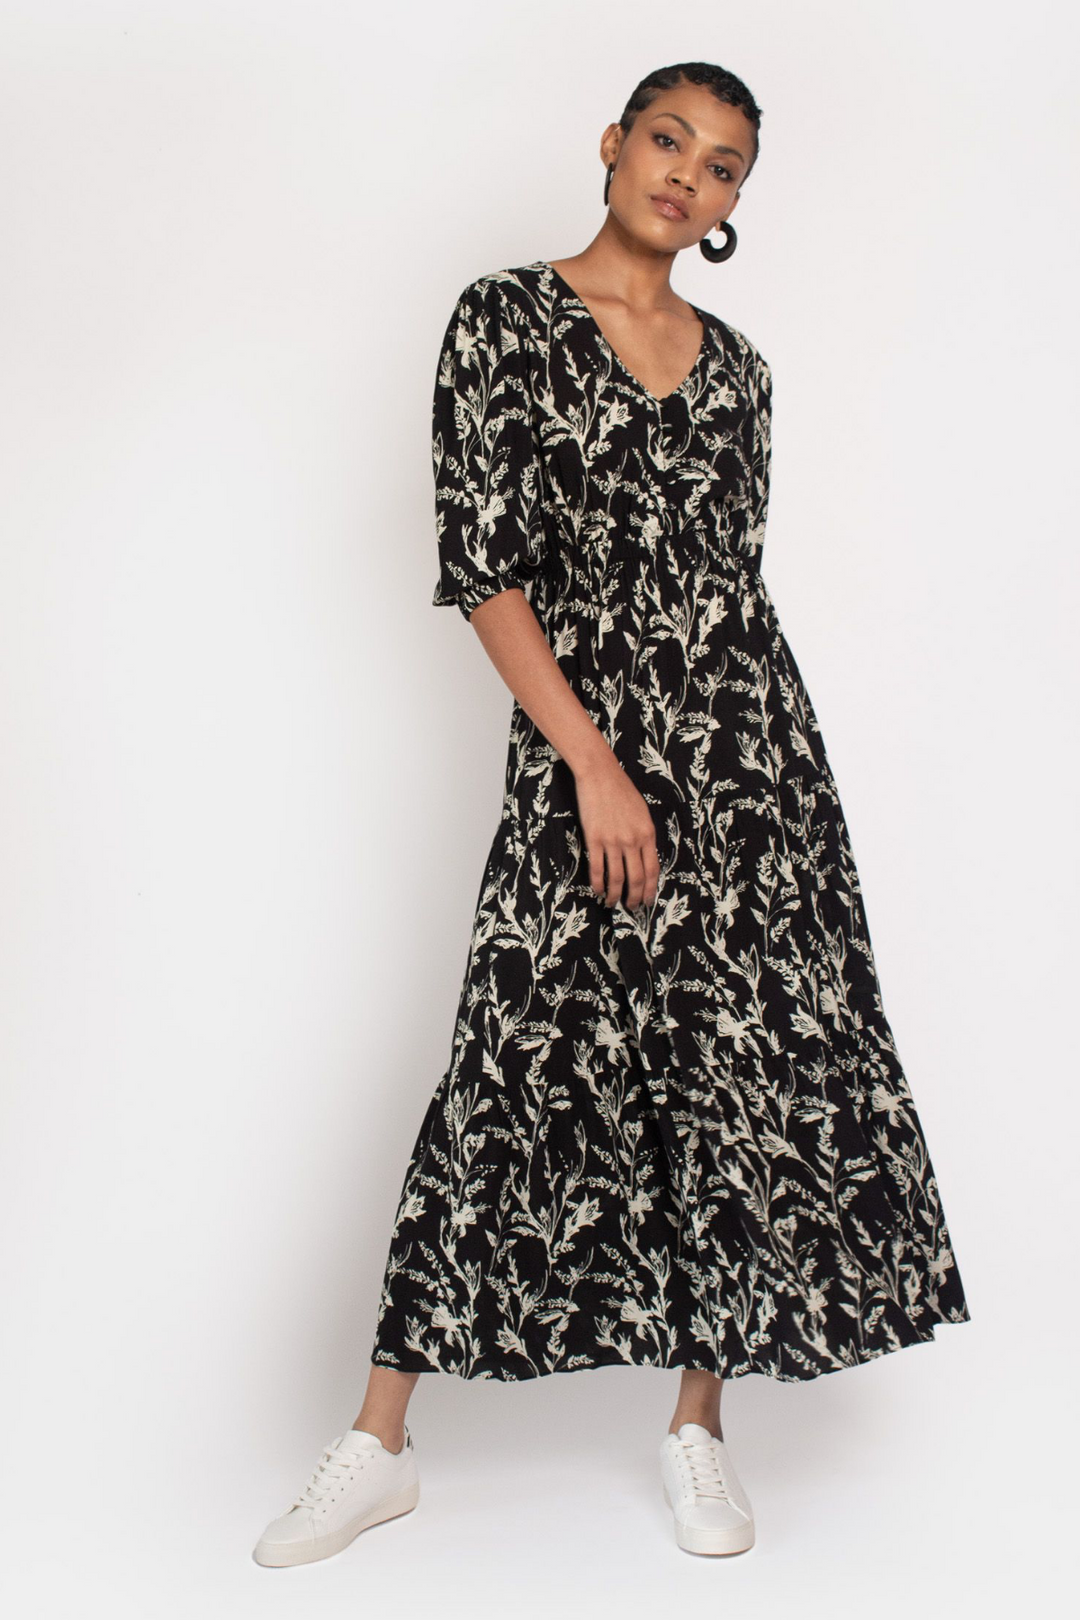 Hide the Label Kalmia Maxi in Black & White Sketch Floral, available in ZERRIN